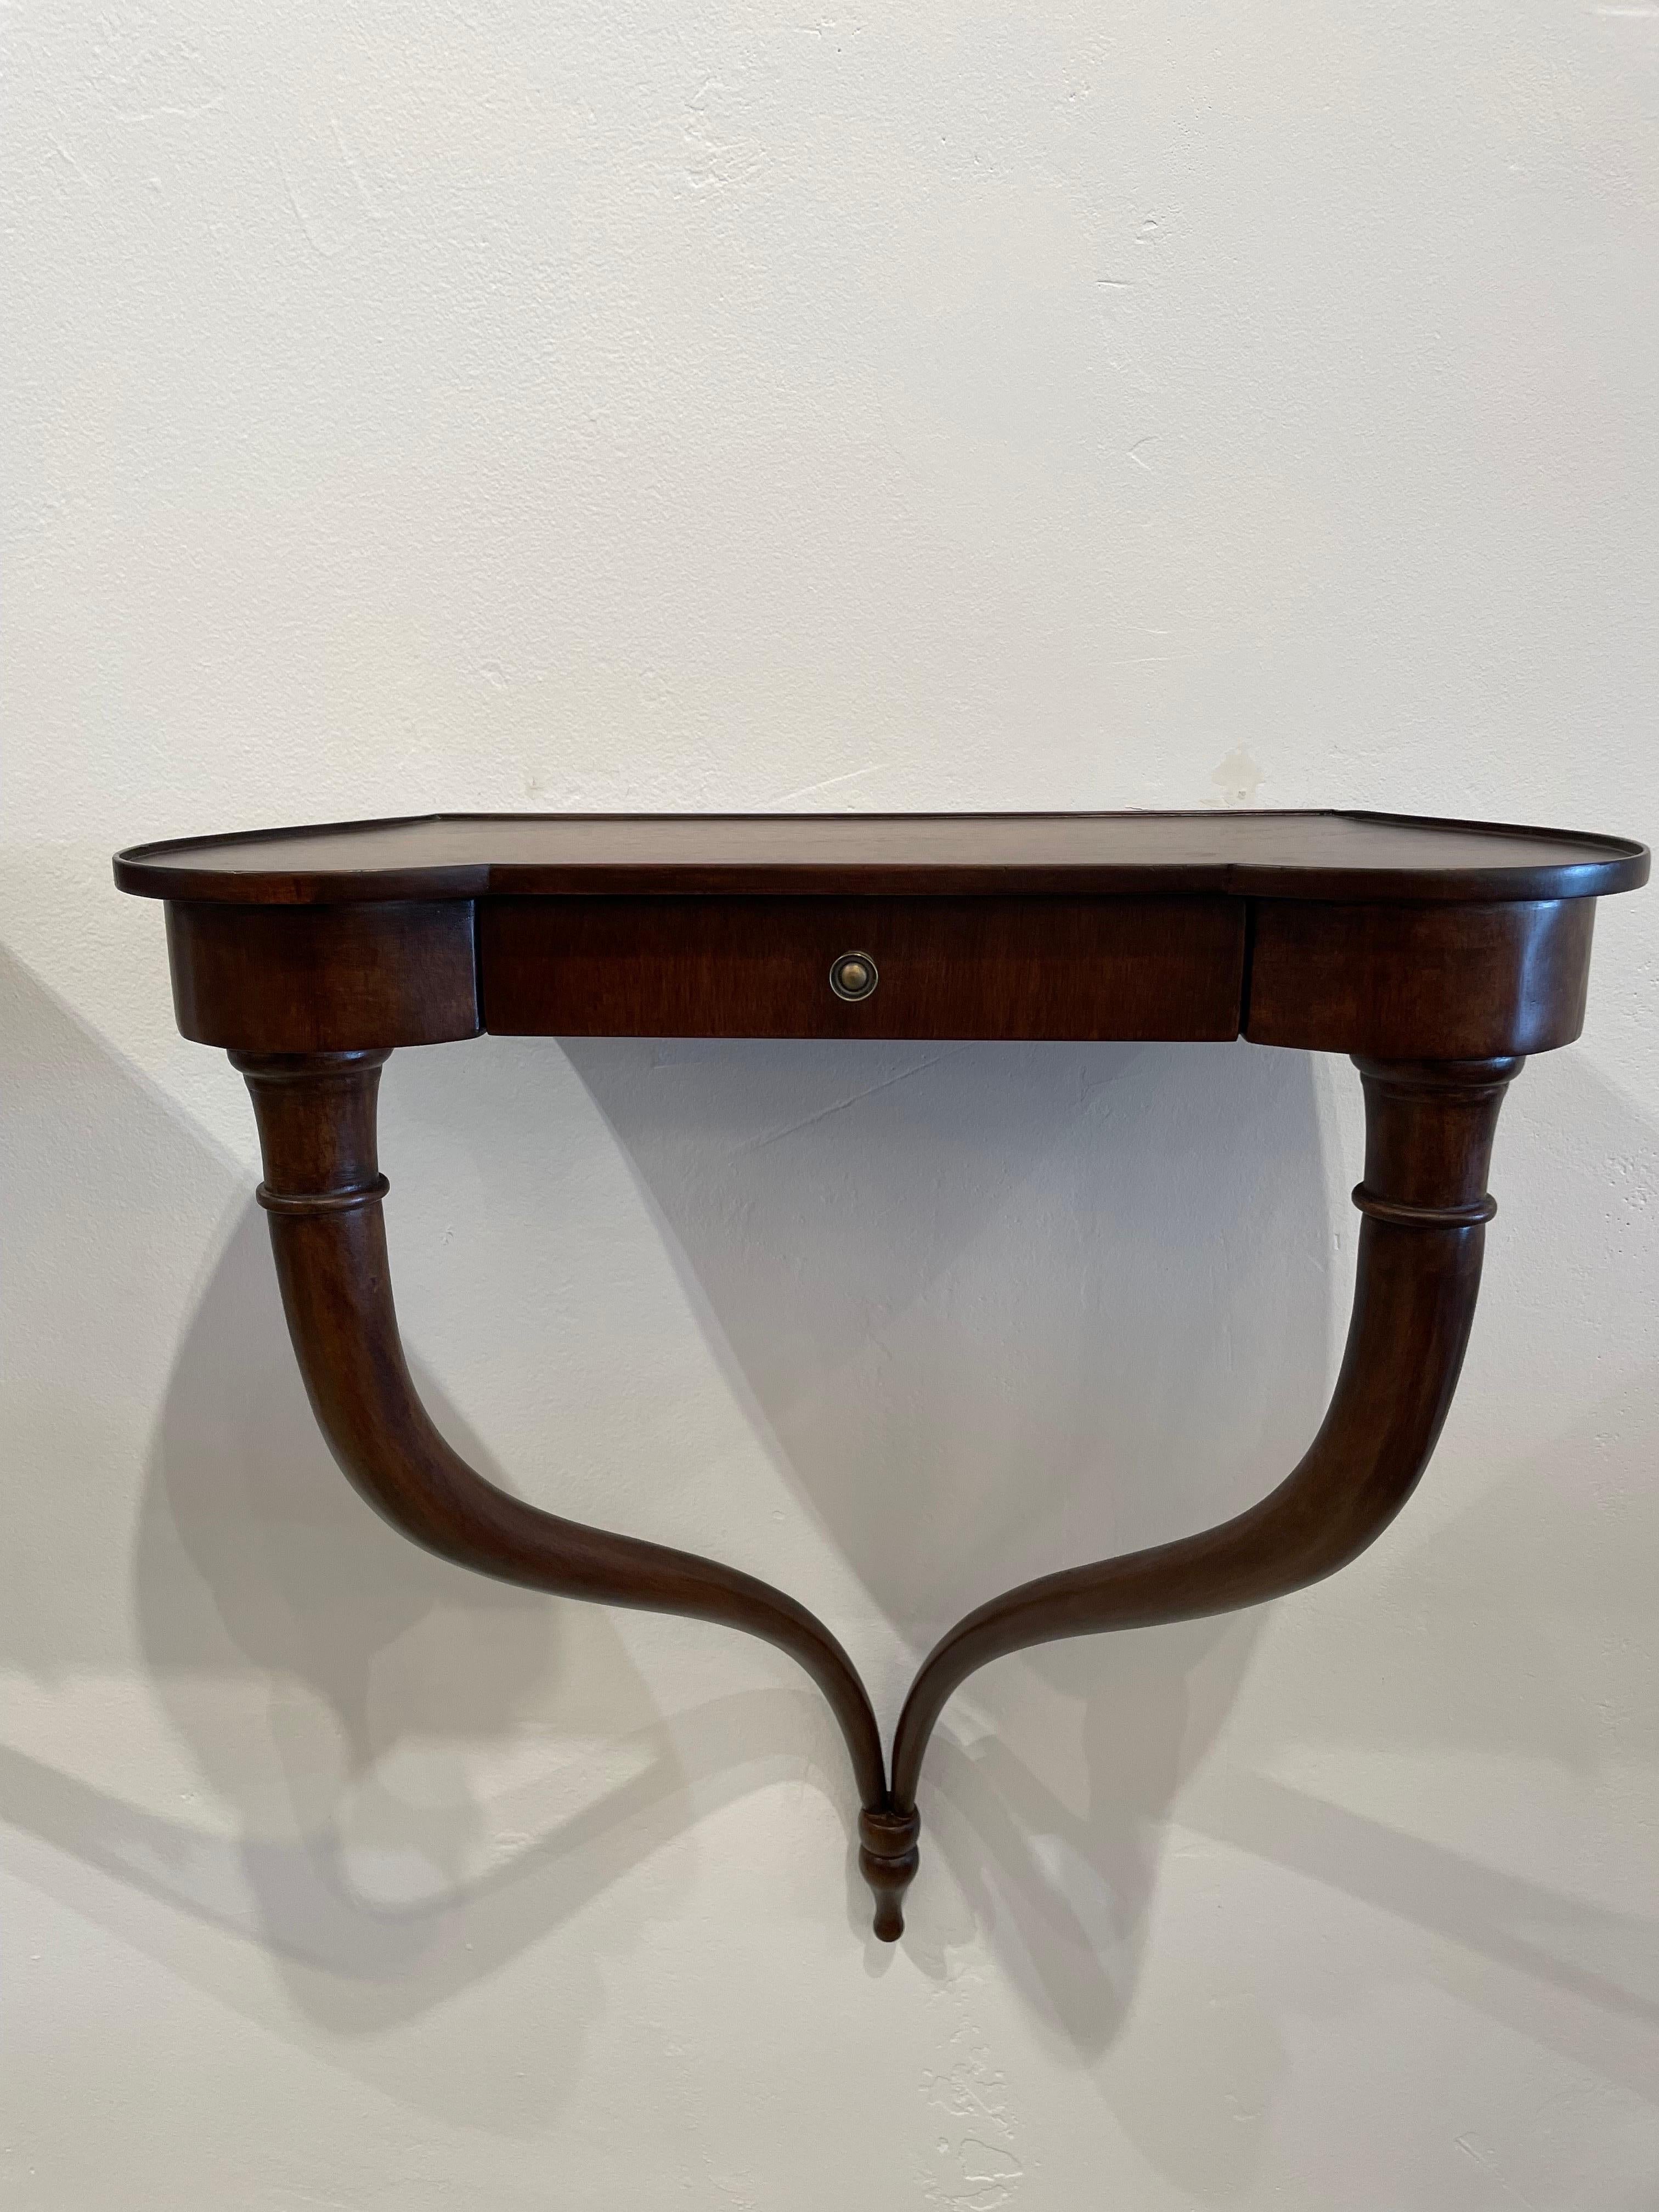 Pair petite Italian 1940's console tables in mahogany, wall mounted shelves or night tables. Elegant vintage Italian serpentine carved mahogany wood wall mounted console tables. Art Deco, in the style of Borsani. The tabletops are uniquely shaped in